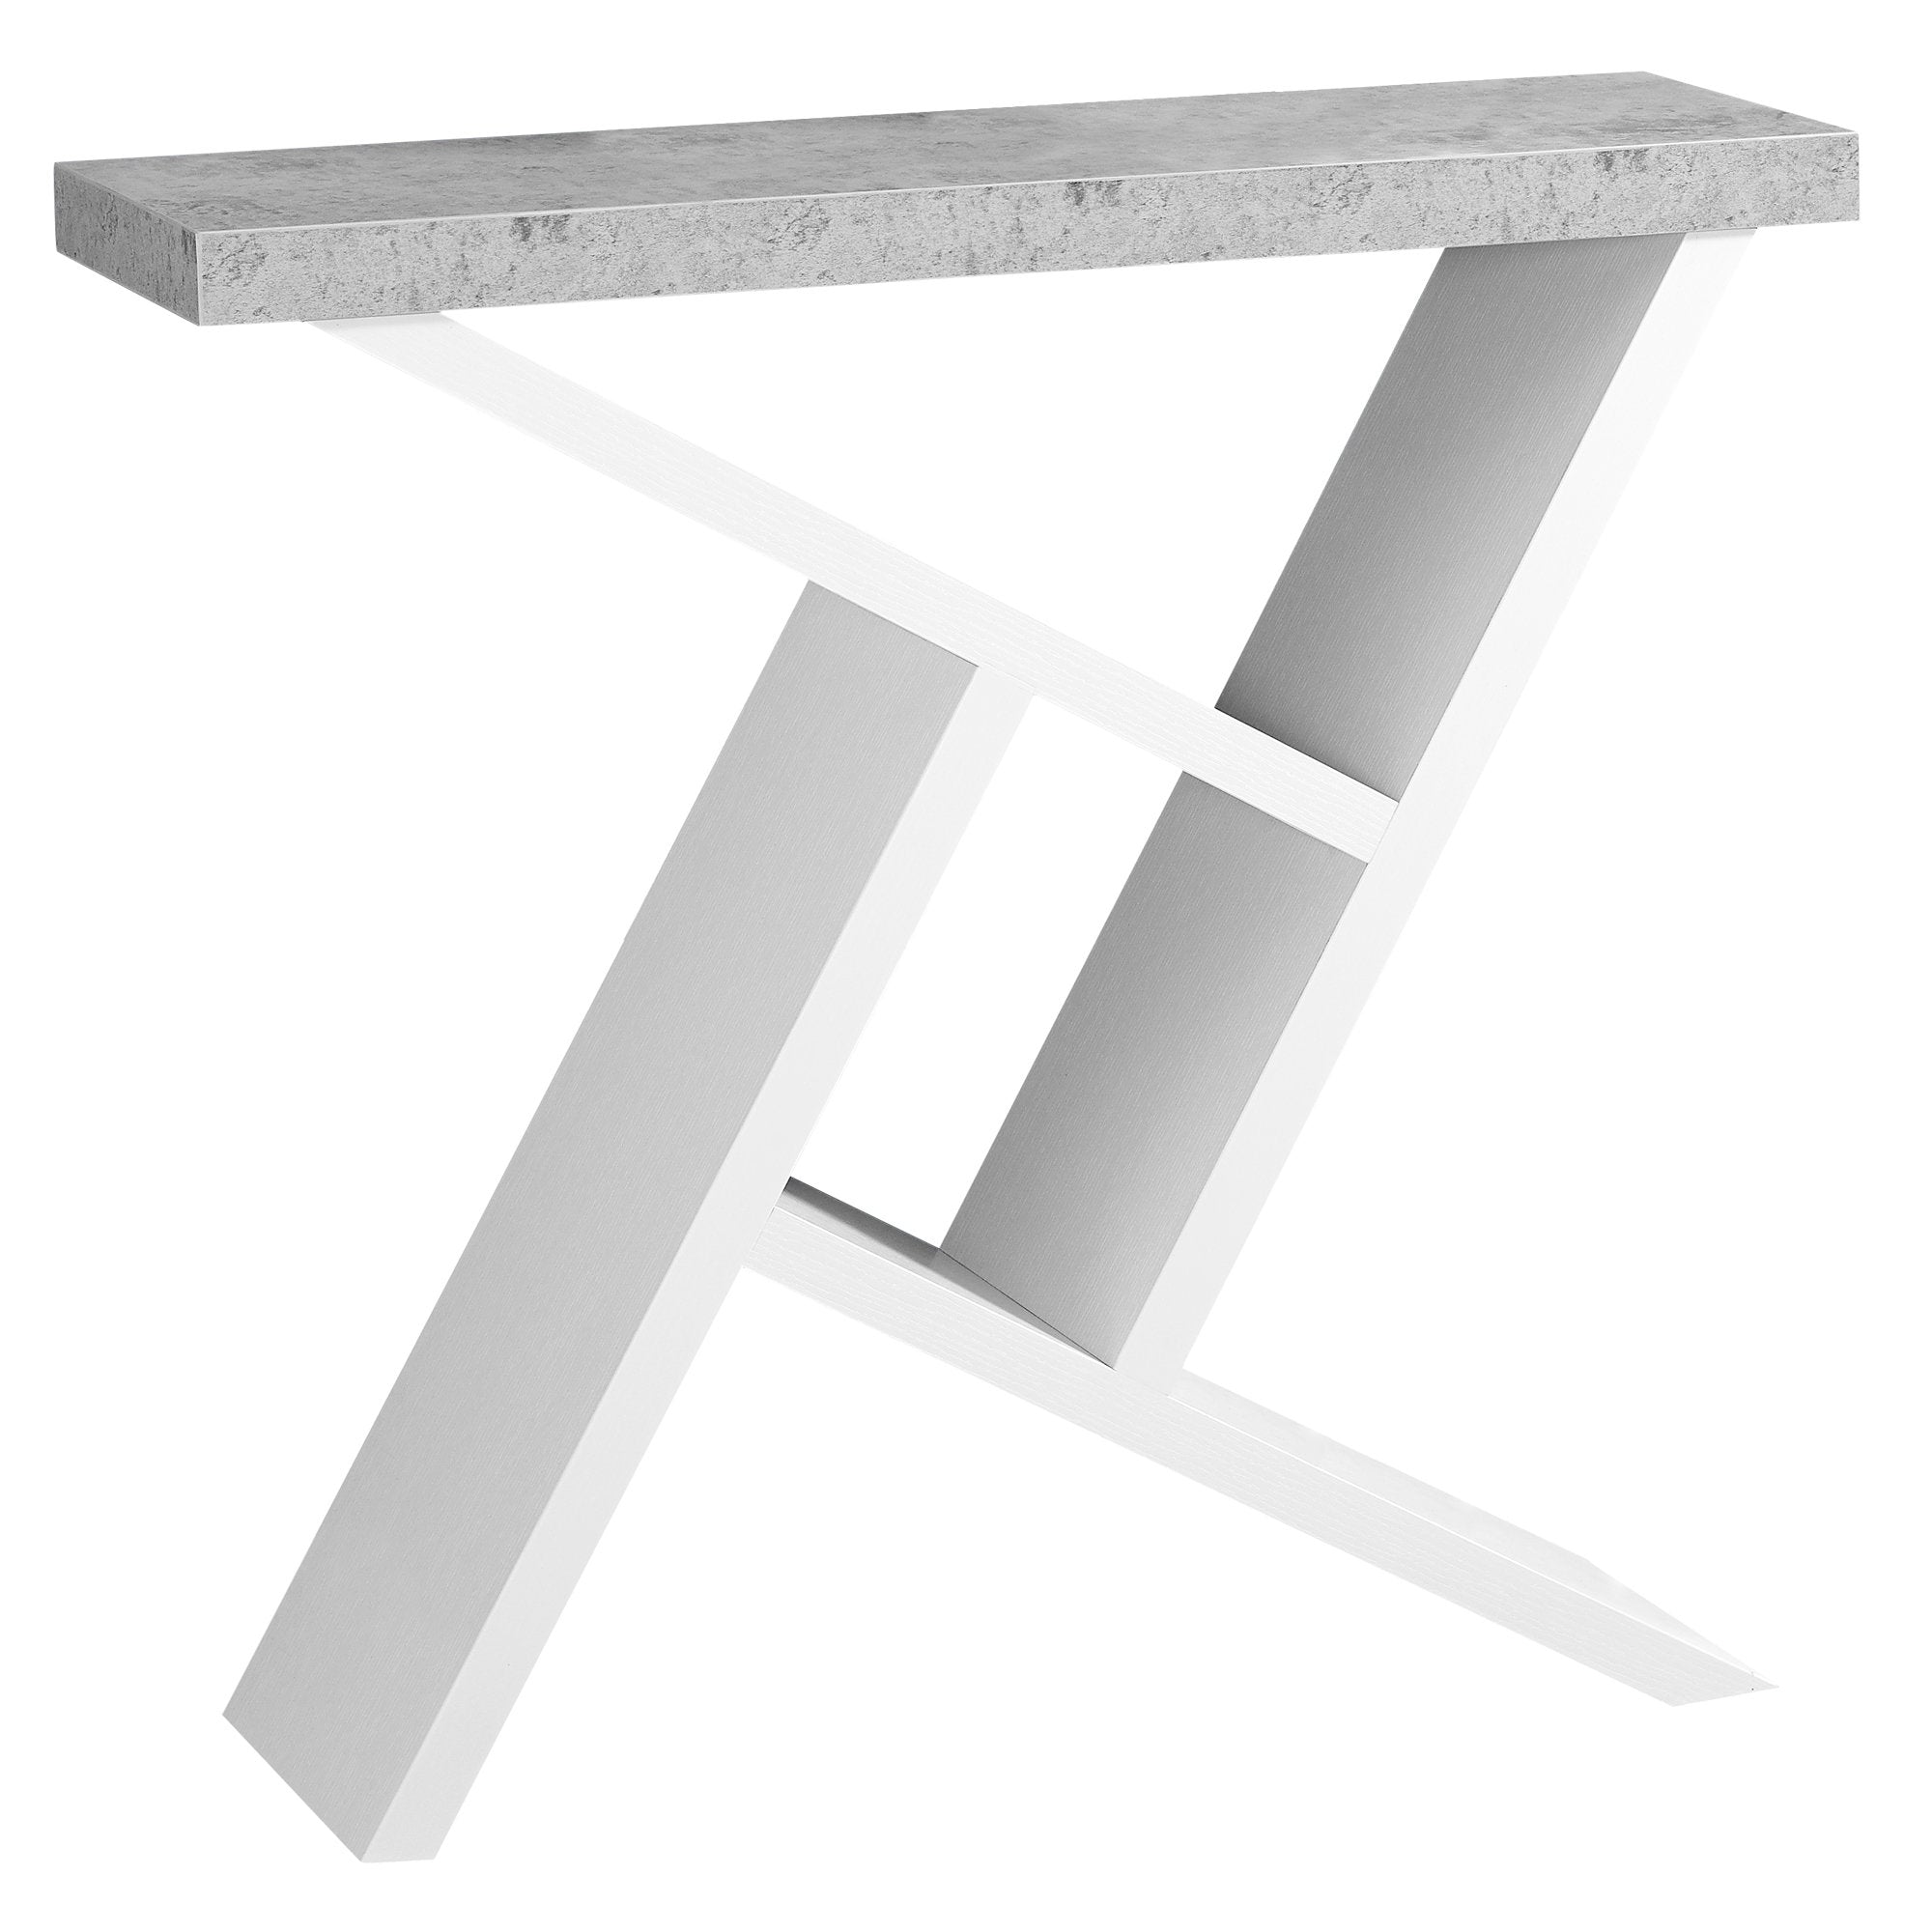 MN-892405    Accent Table, Console, Entryway, Narrow, Sofa, Living Room, Bedroom, Laminate, Grey Cement Look, White, Contemporary, Modern